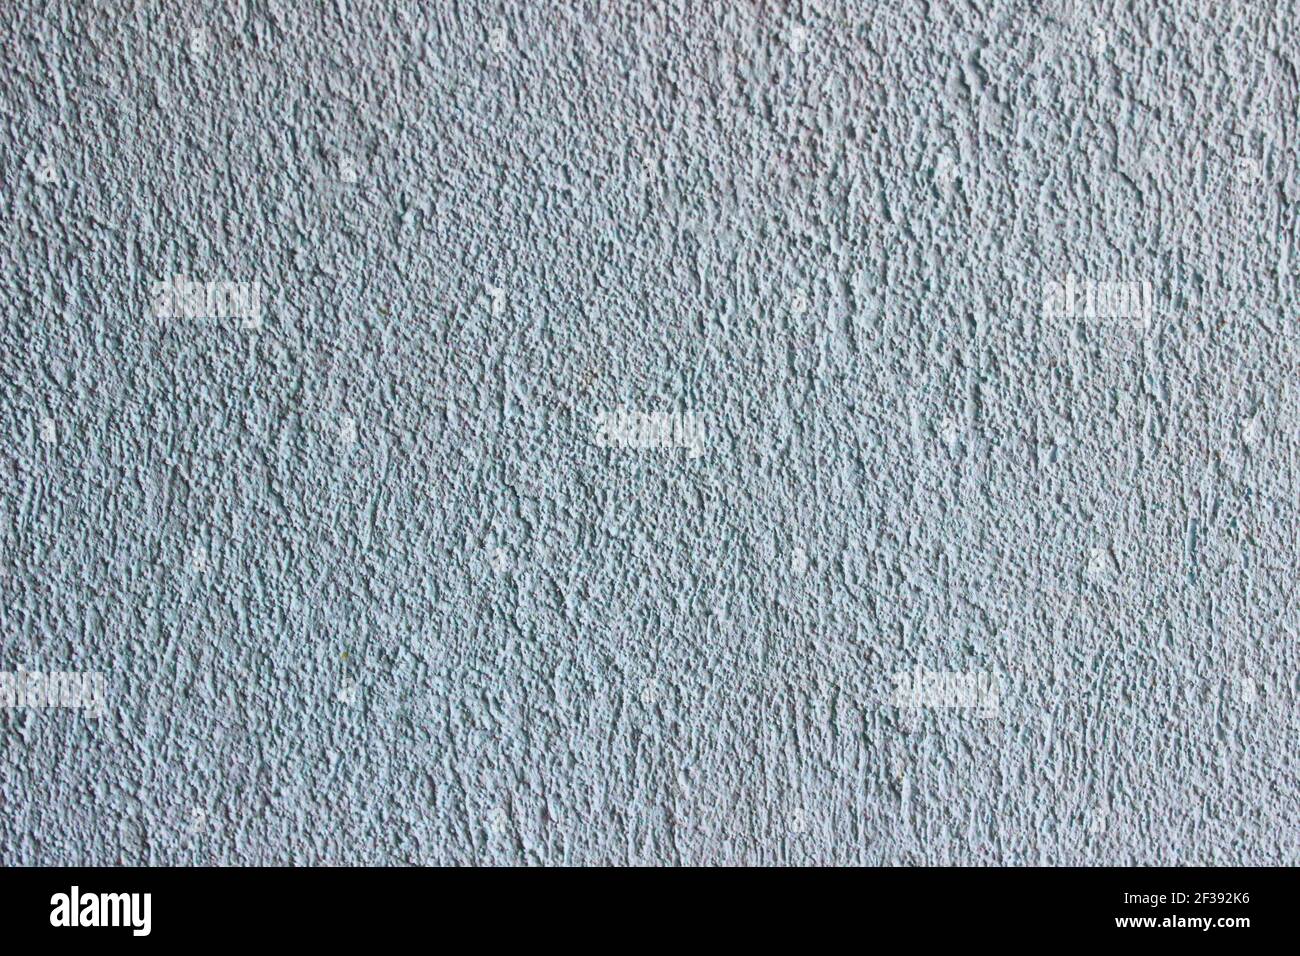 Abstract Grunge Decorative Light Blue Plaster Wall Background with Winter Pattern. Rough Stylized Texture Wide Screen With Copy Space for Design Stock Photo